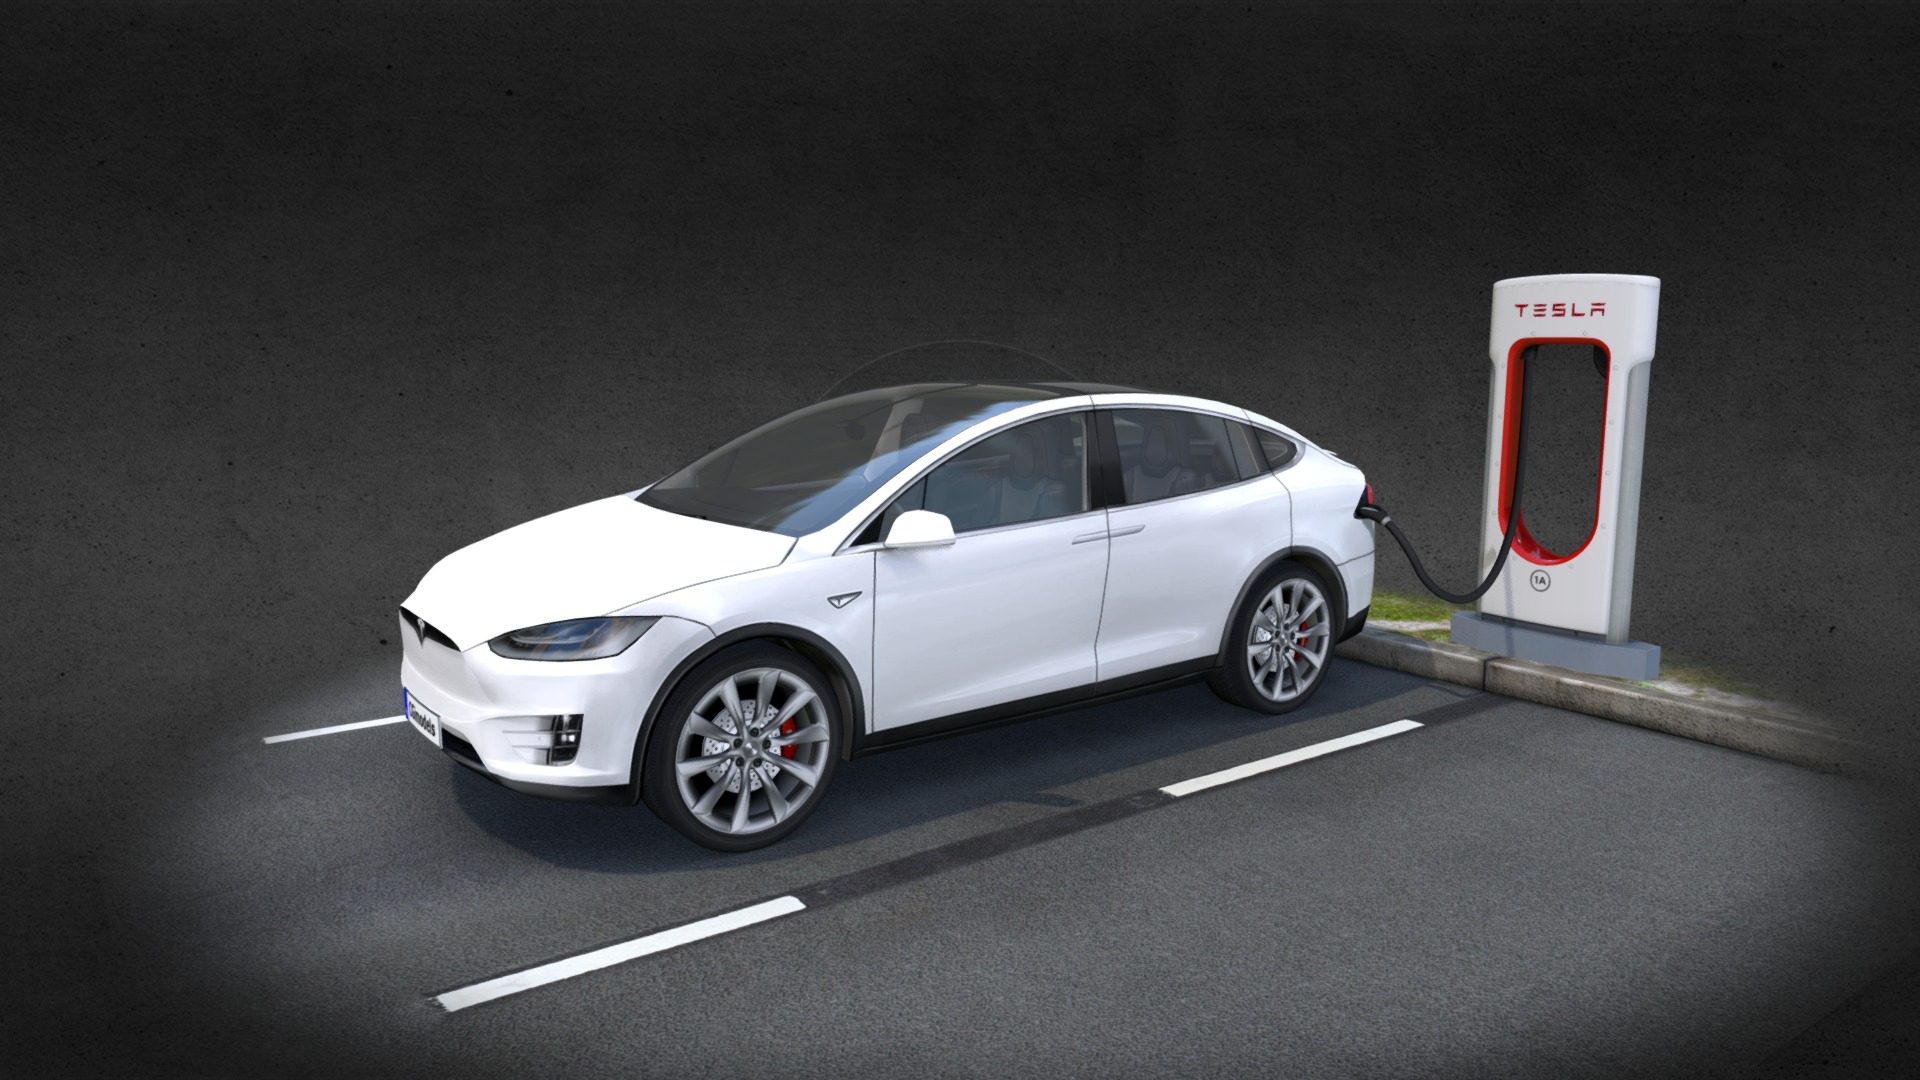 3D model Tesla X - This is a 3D model of the Tesla X. The 3D model is about a car parked in a parking lot.